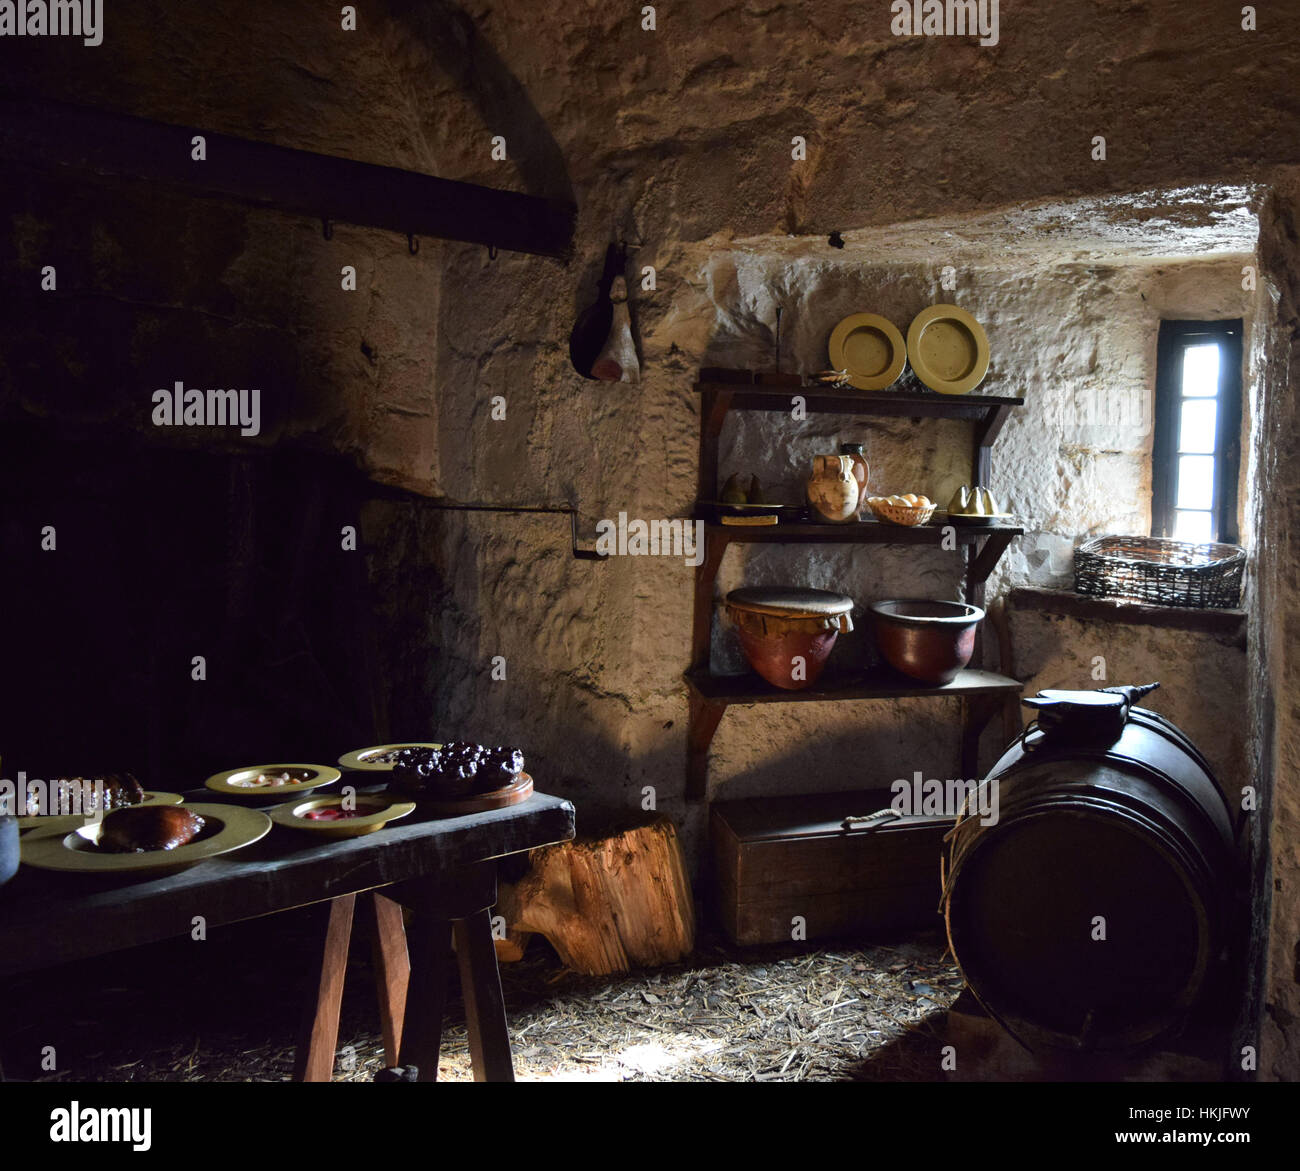 https://c8.alamy.com/comp/HKJFWY/medieval-kitchen-in-castle-rushen-museum-on-the-isle-of-man-HKJFWY.jpg